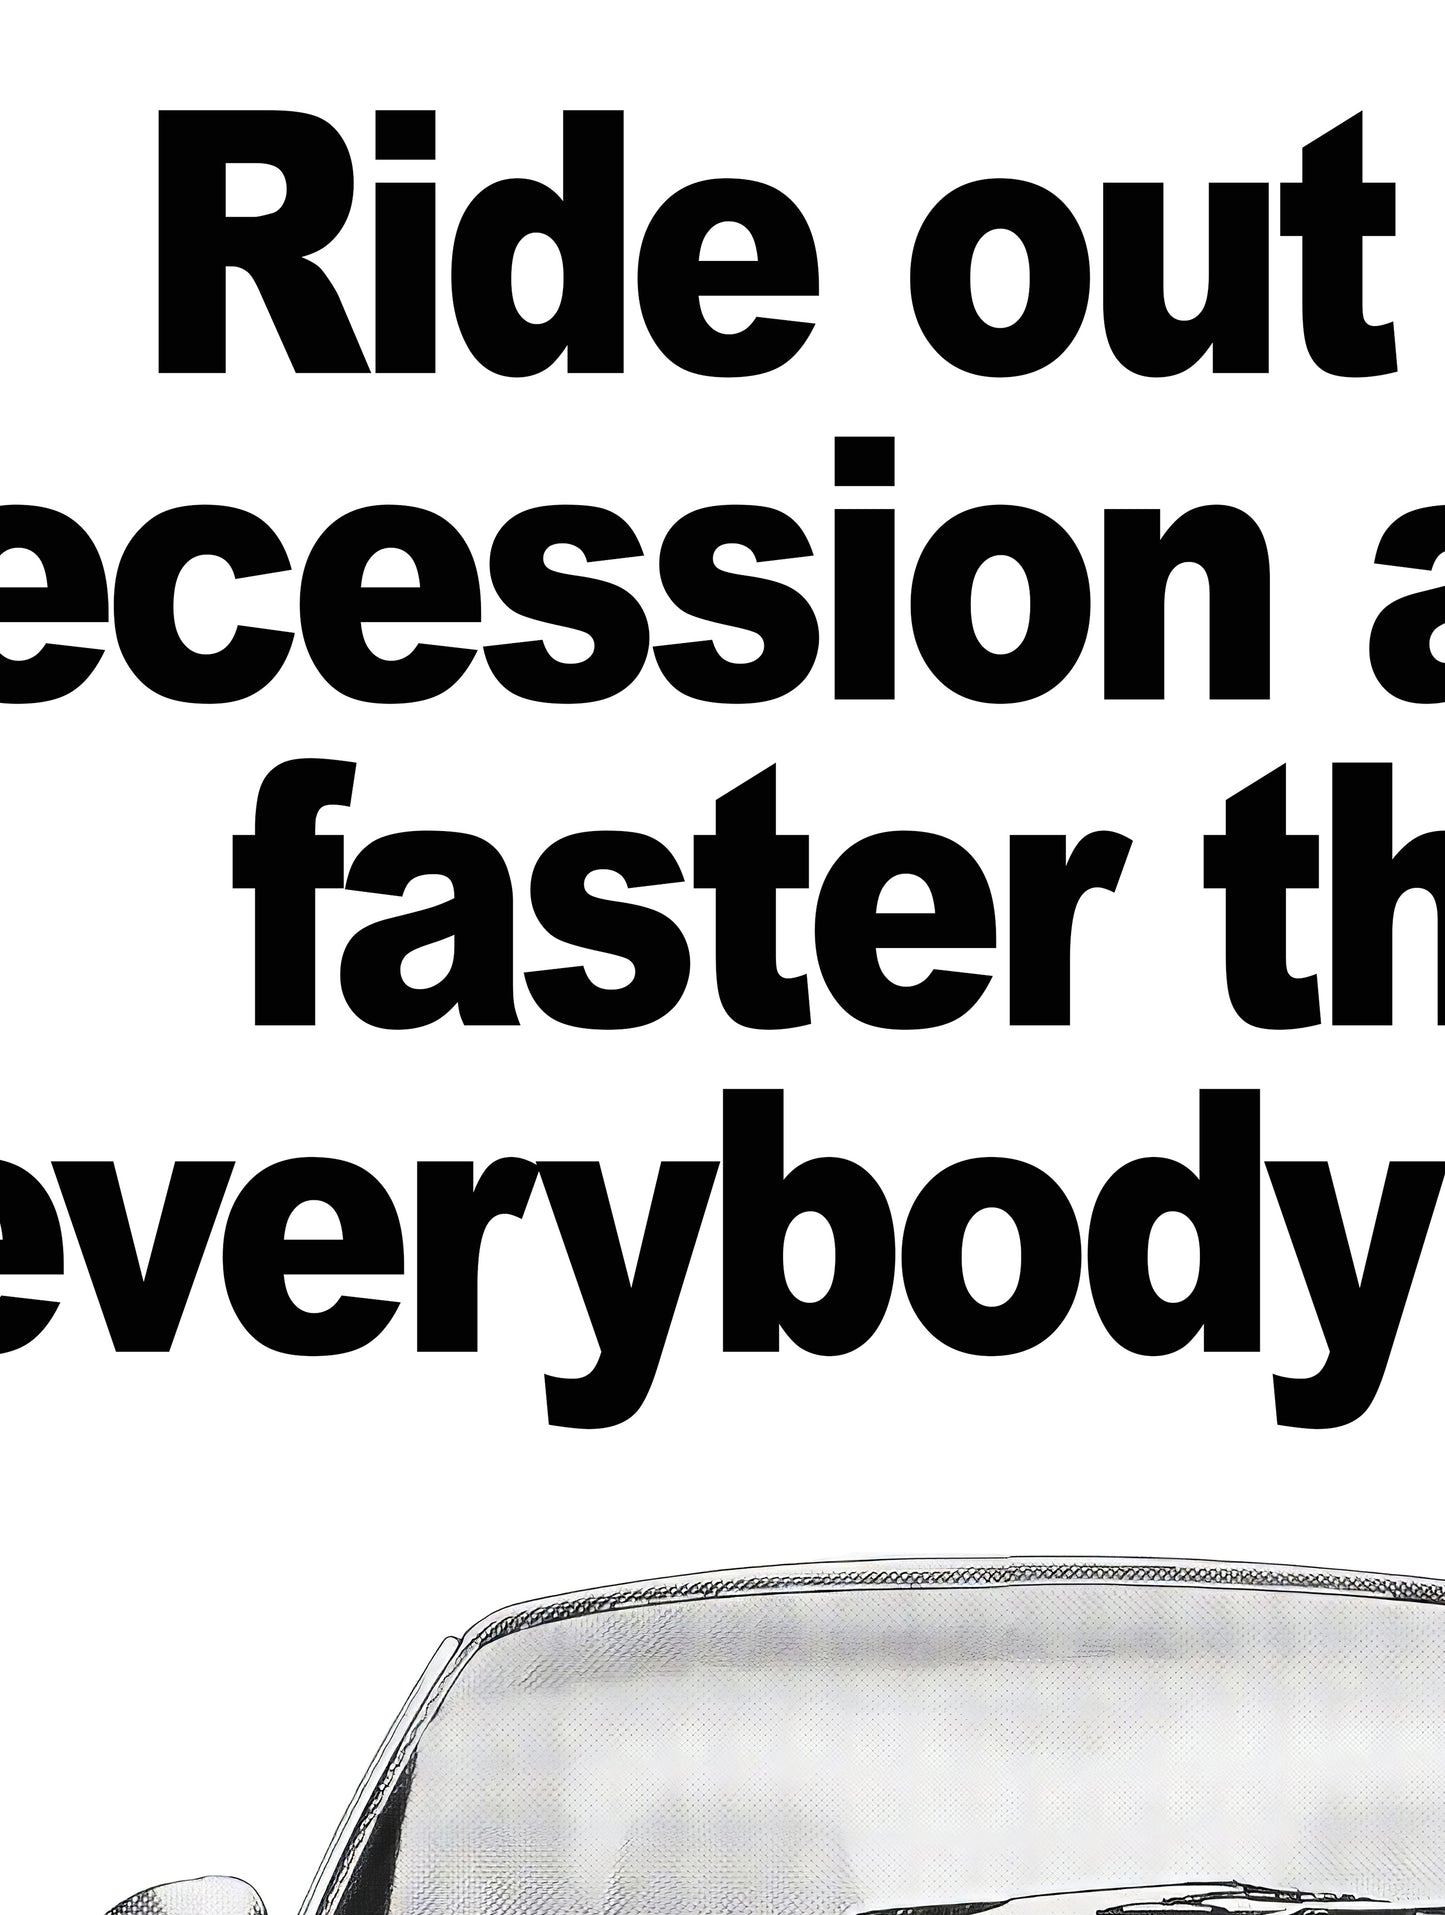 Porsche "Ride Out The Recession A Little Faster Than Everybody Else" Poster